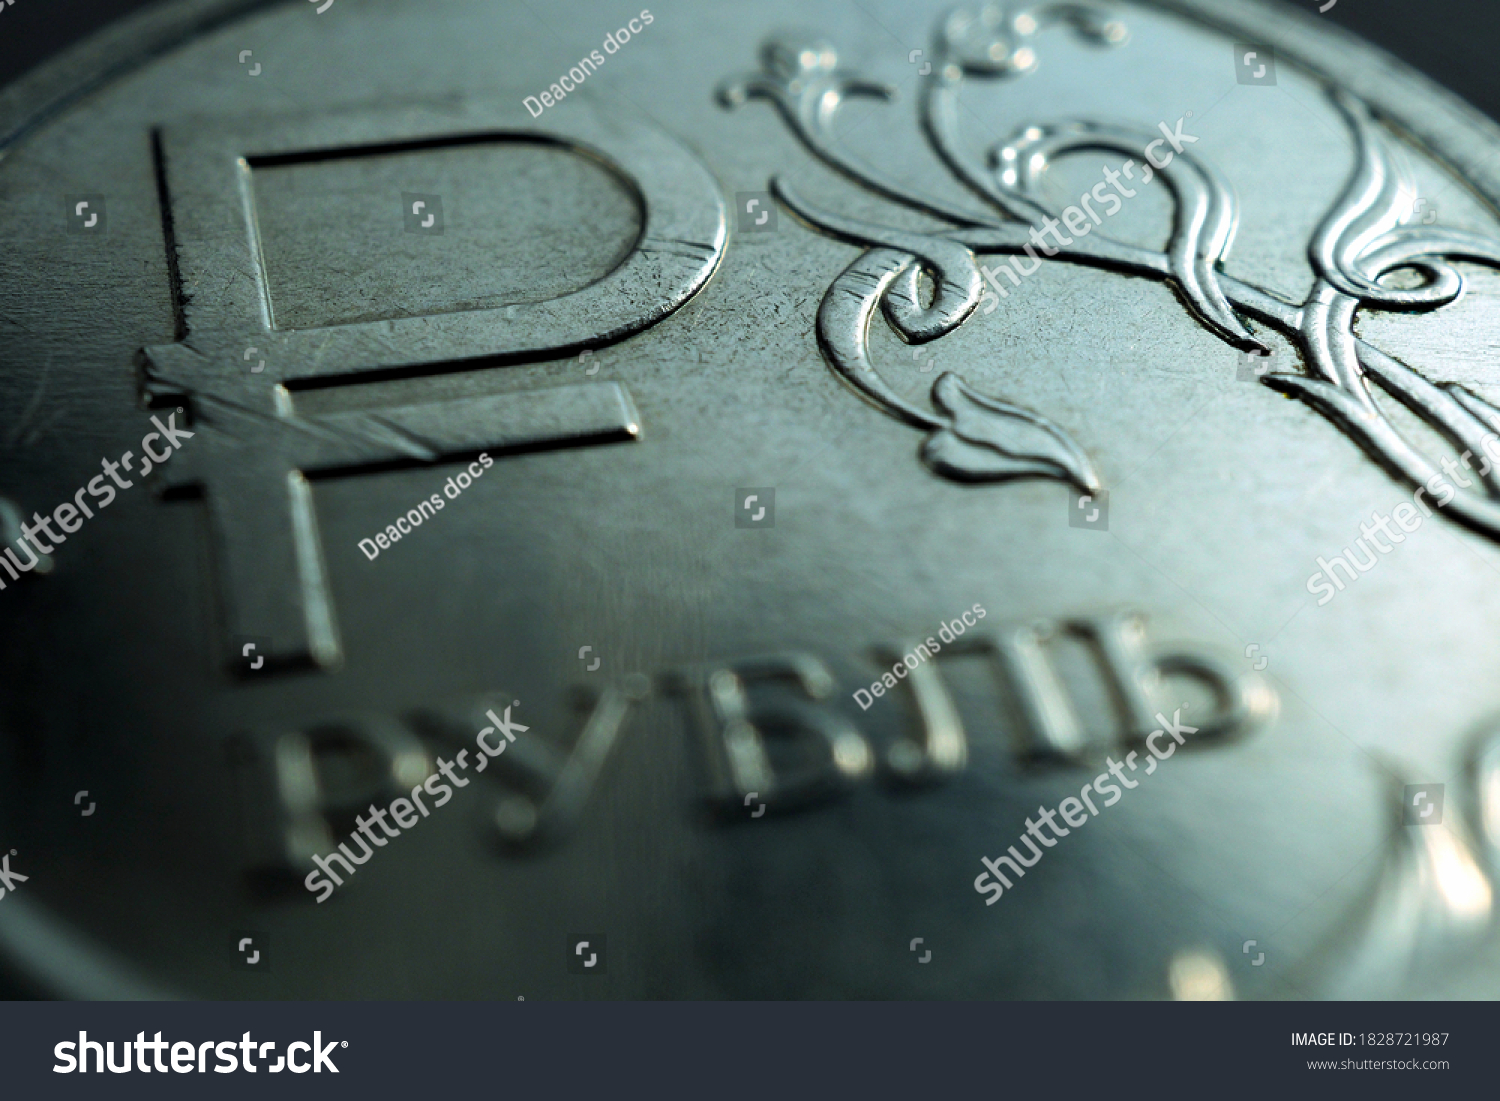 Translation of the inscription: ruble. Russian 1 one ruble coin with the symbol of the national currency of Russia. Dark blue and green toned illustration on the theme of money, economy and finance #1828721987